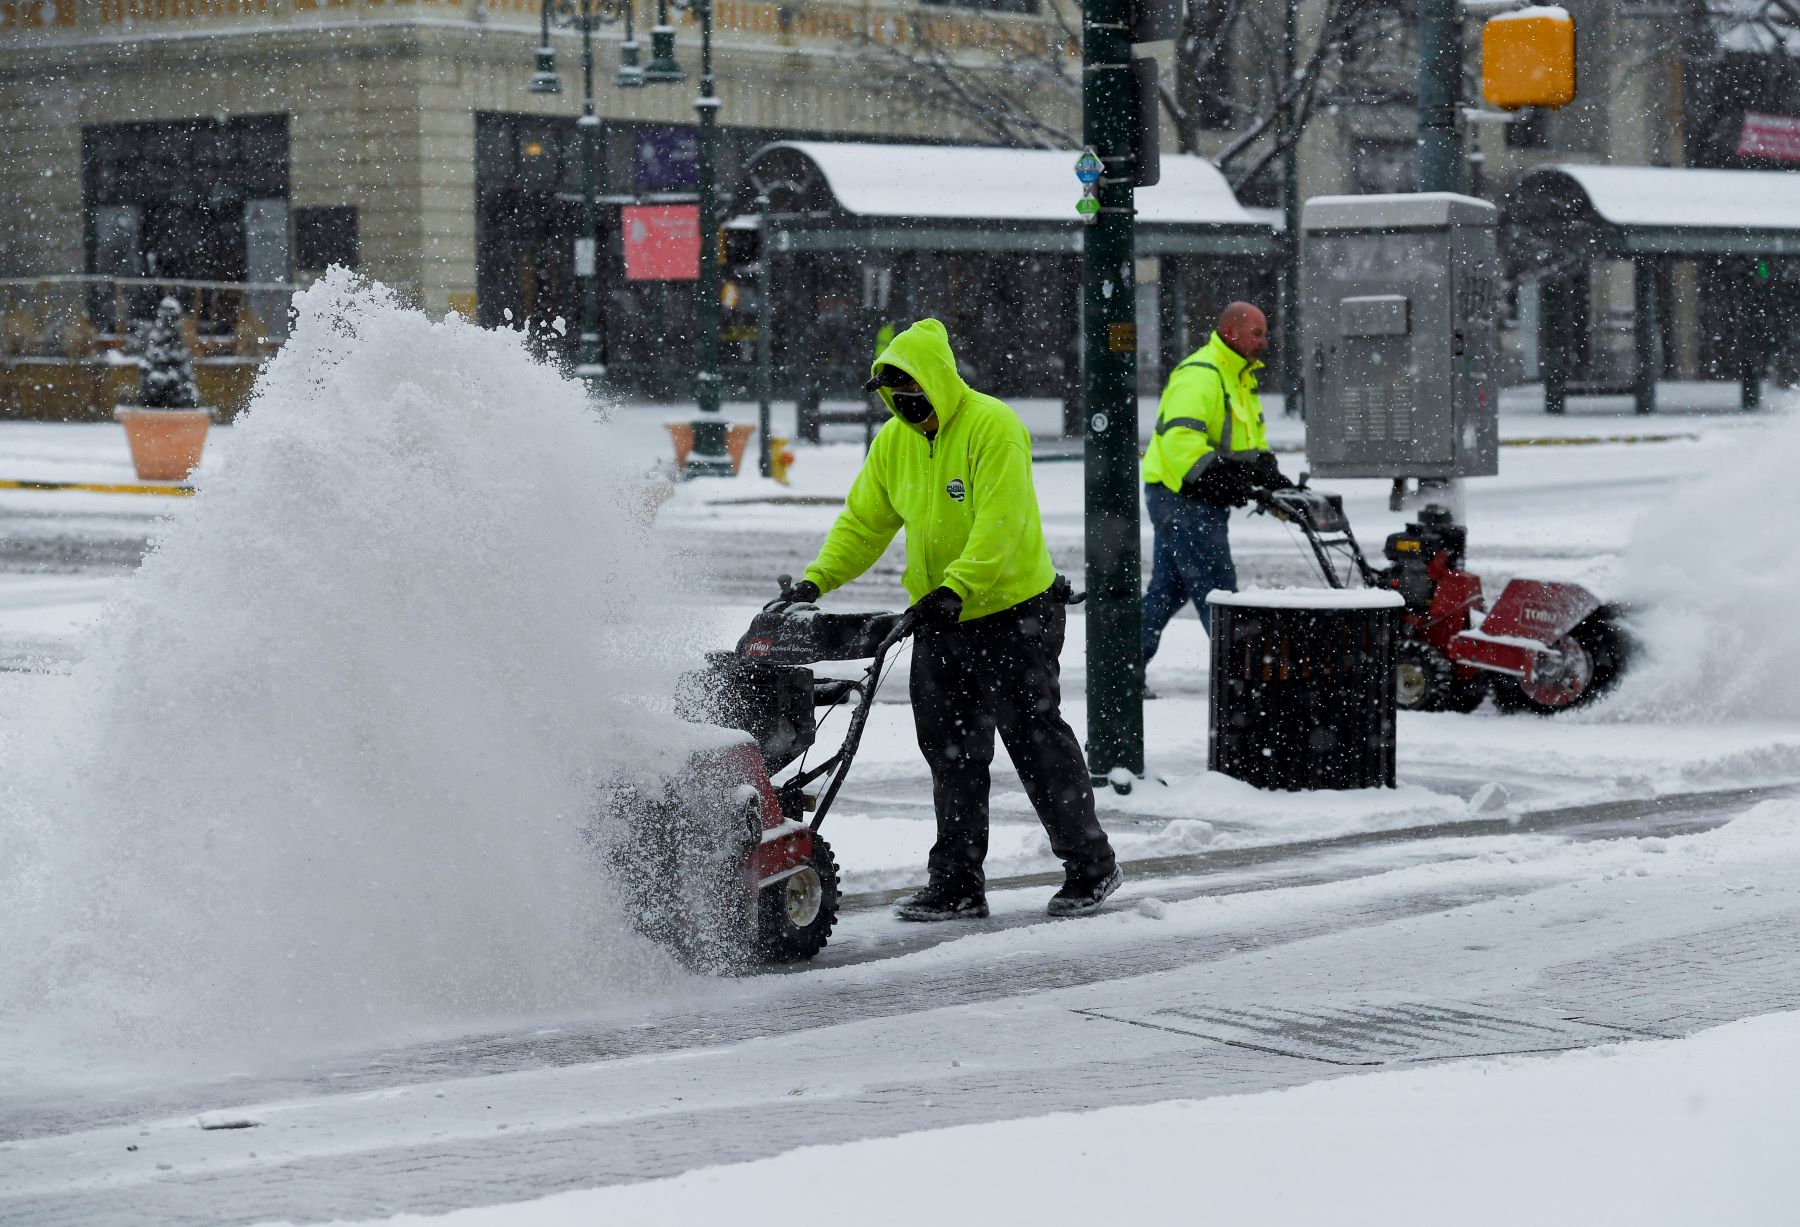 A pair of Public Works city workers clearing snow on a street using snow blowers in Reading, Pennsylvania